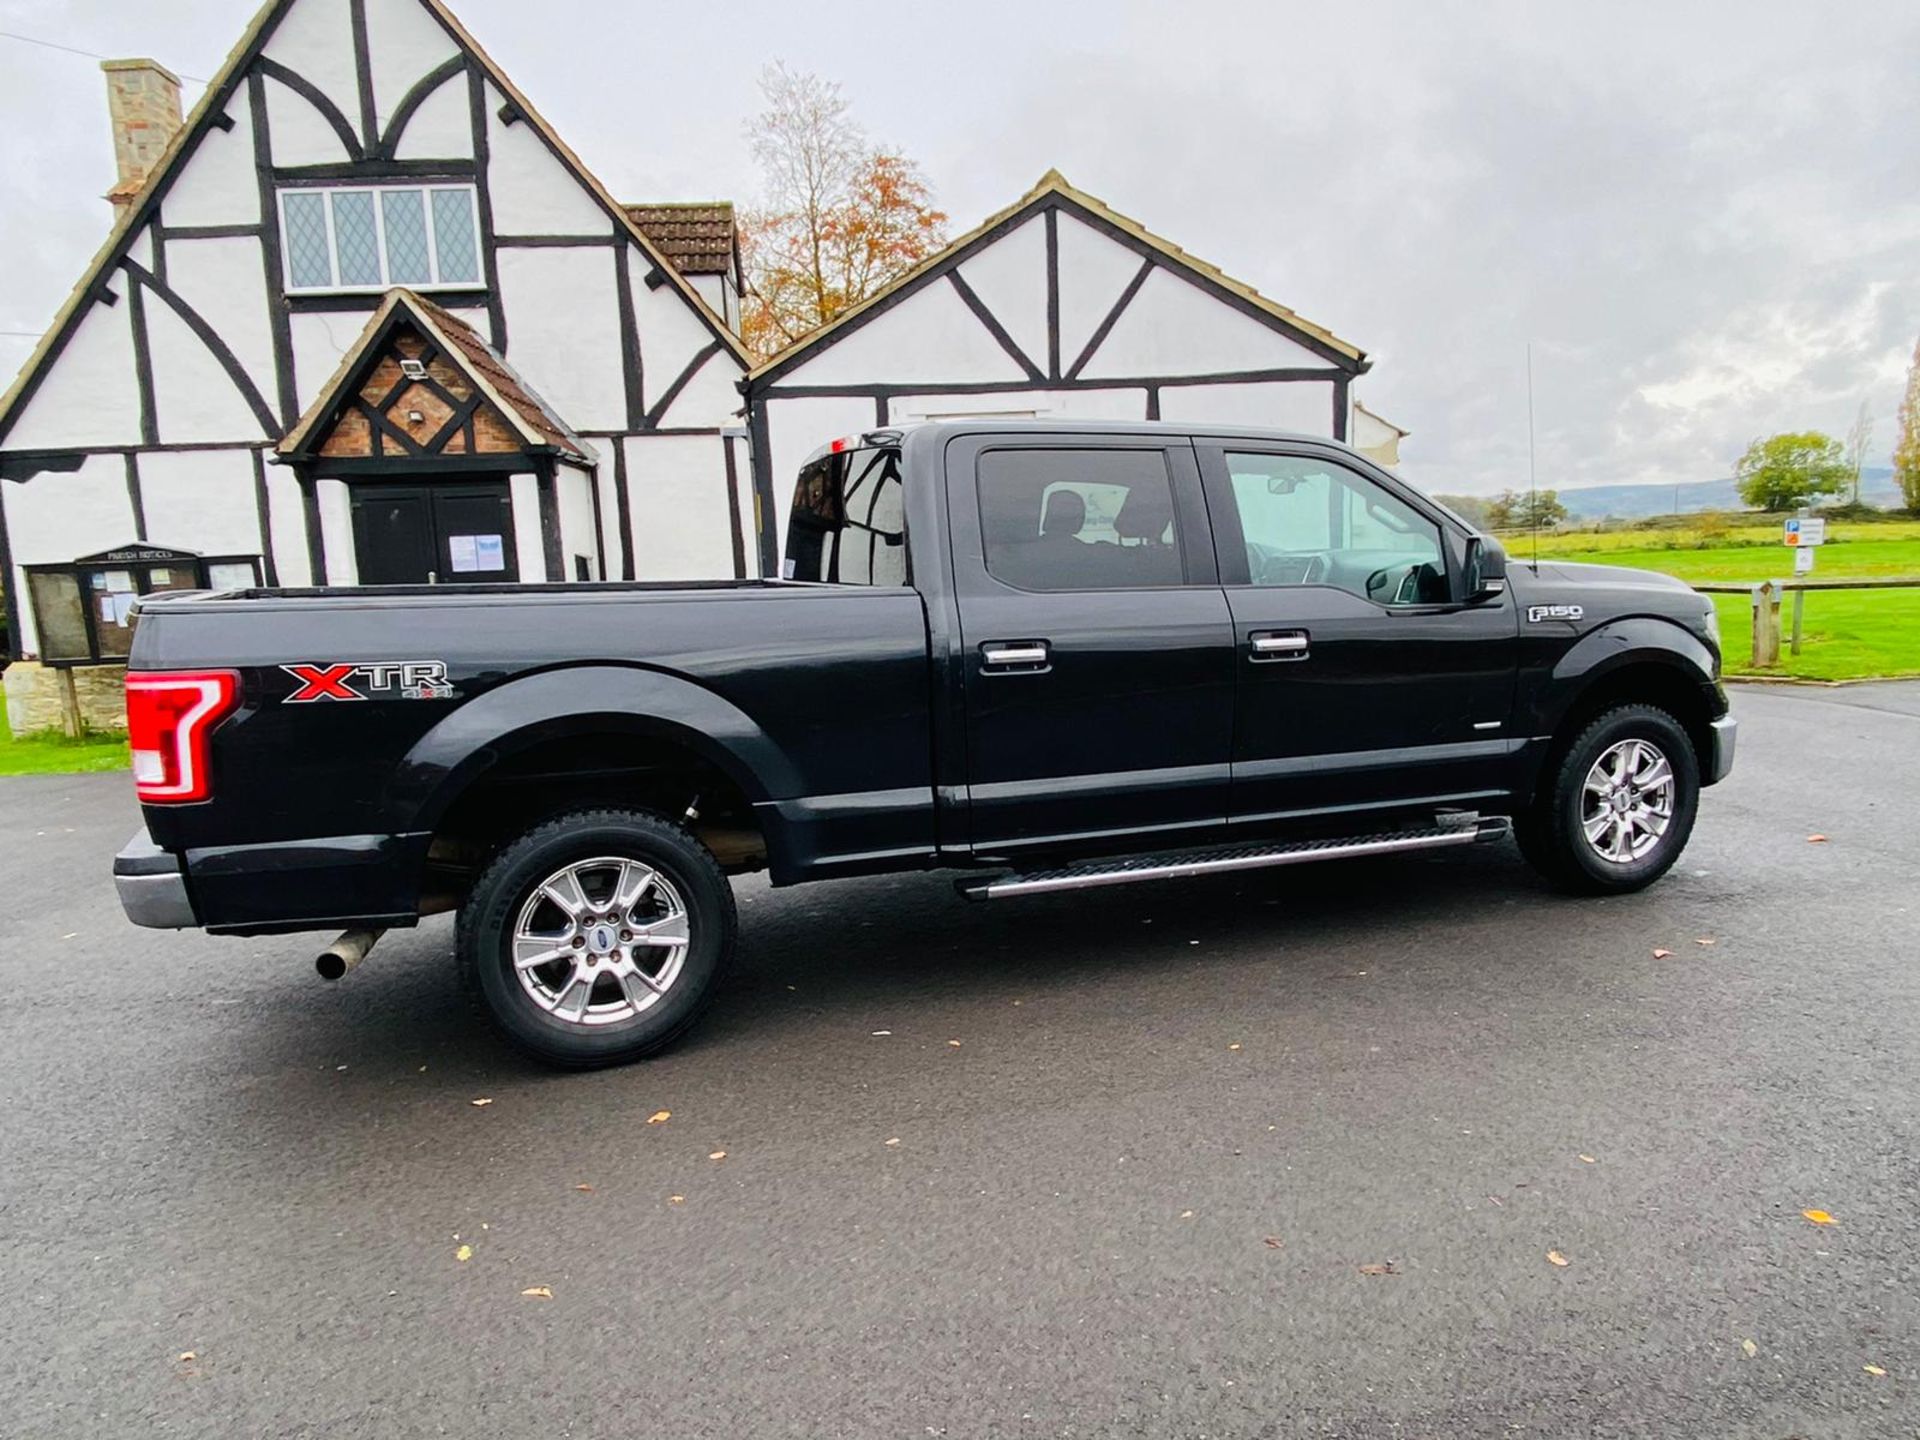 Ford F-150 3.5L V6 Ecoboost XLT Supercrew Cab XTR Spec 4x4 - 2015 Year - WOW! Fresh Import - Image 18 of 56